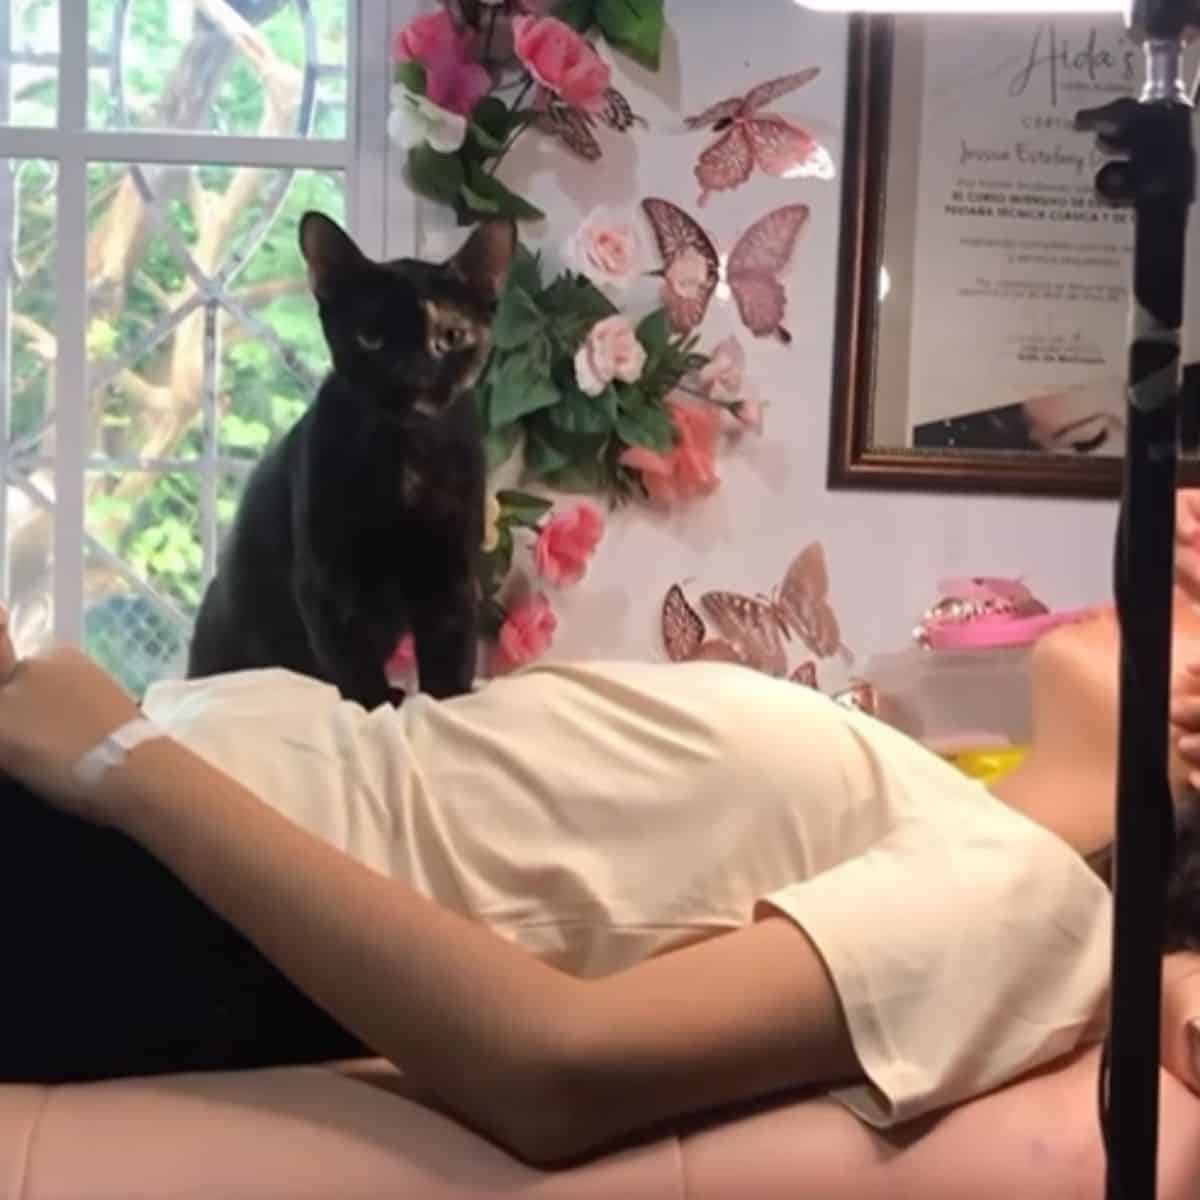 the cat sits on the client's stomach